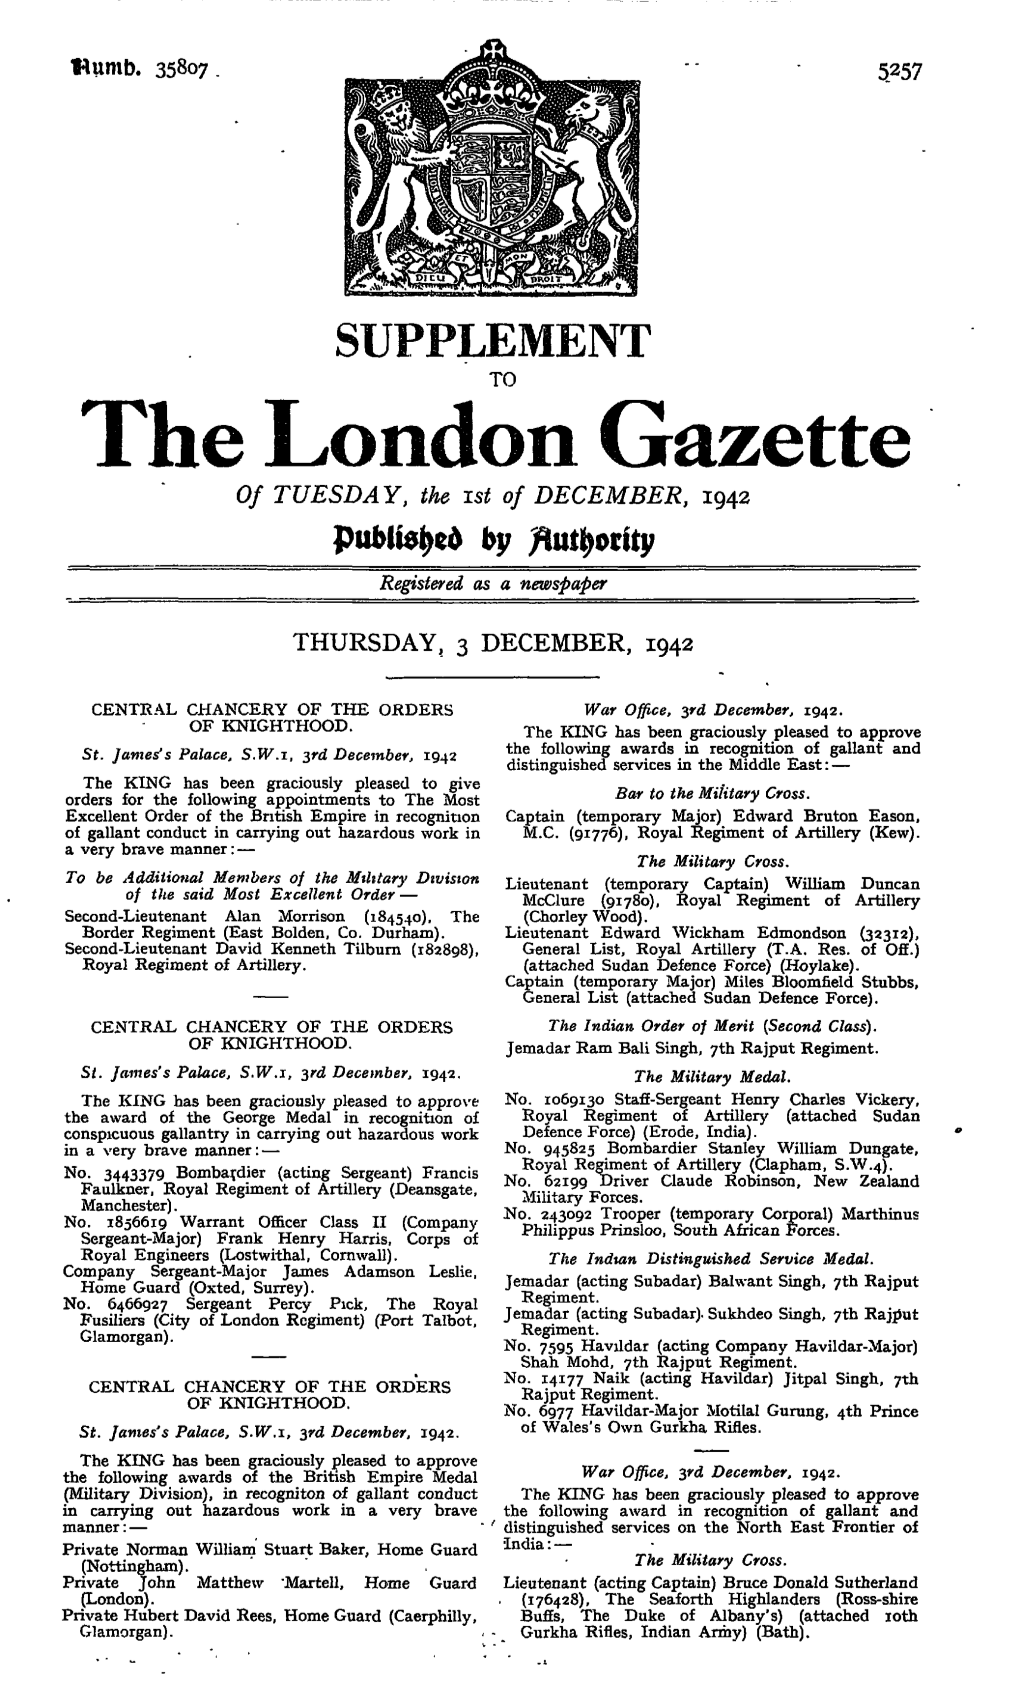 The London Gazette of TUESDAY, the Ist of DECEMBER, 1942 Published by Registered As a Newspaper